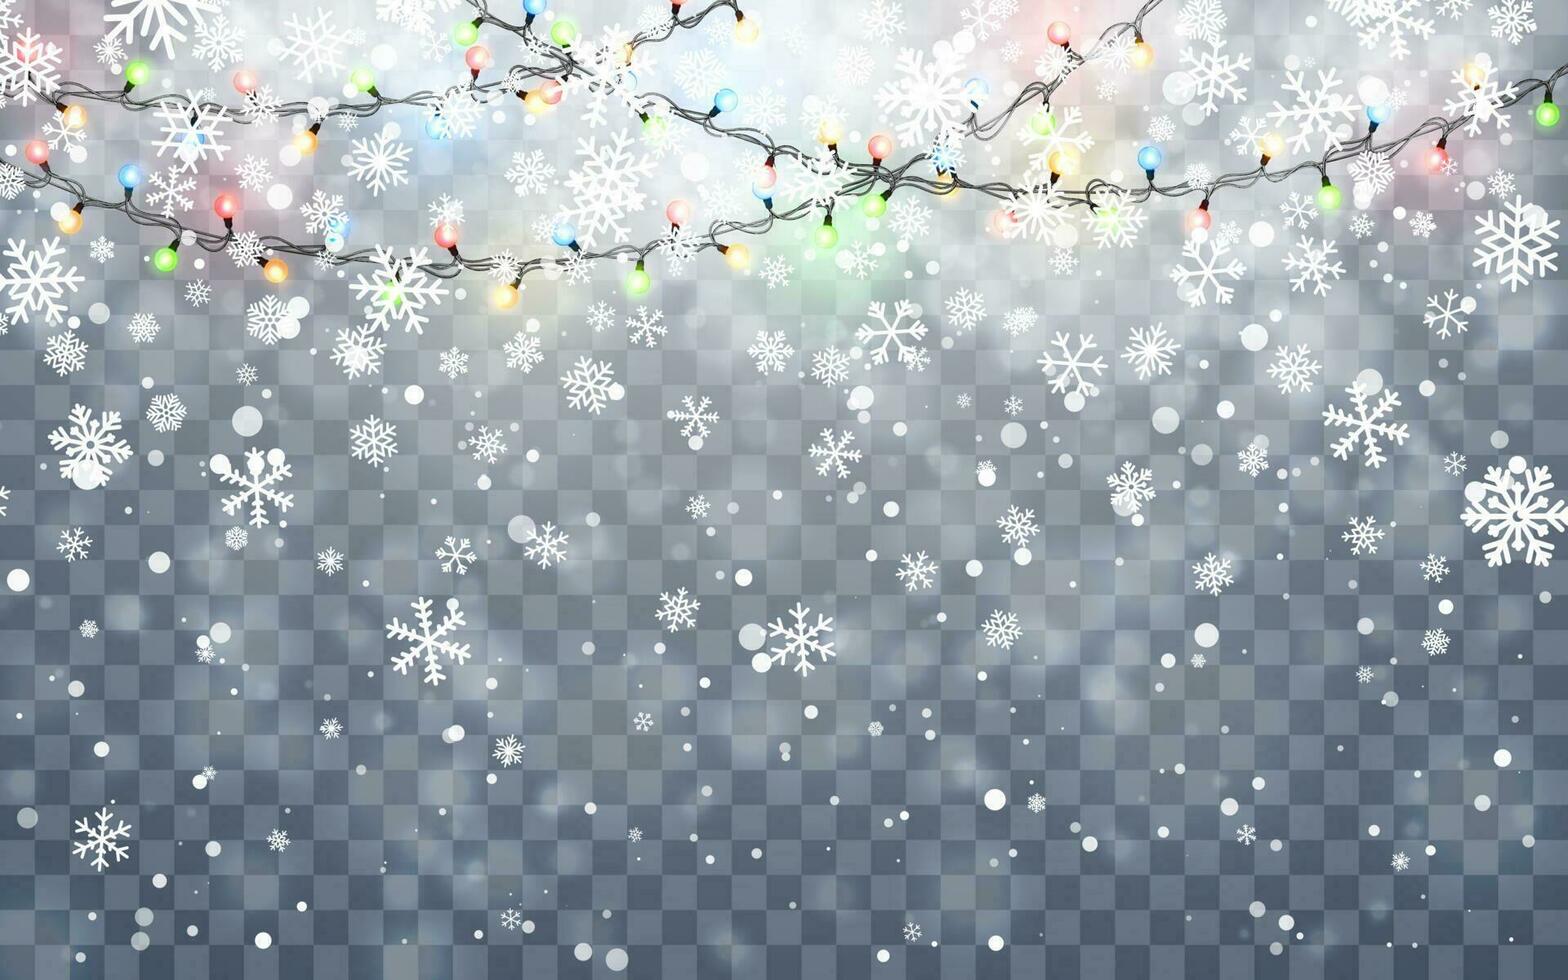 Christmas snow. Falling white snowflakes on dark background. Xmas Color garland, festive decorations. Glowing christmas lights. Vector snowfall, snowflakes flying in winter air